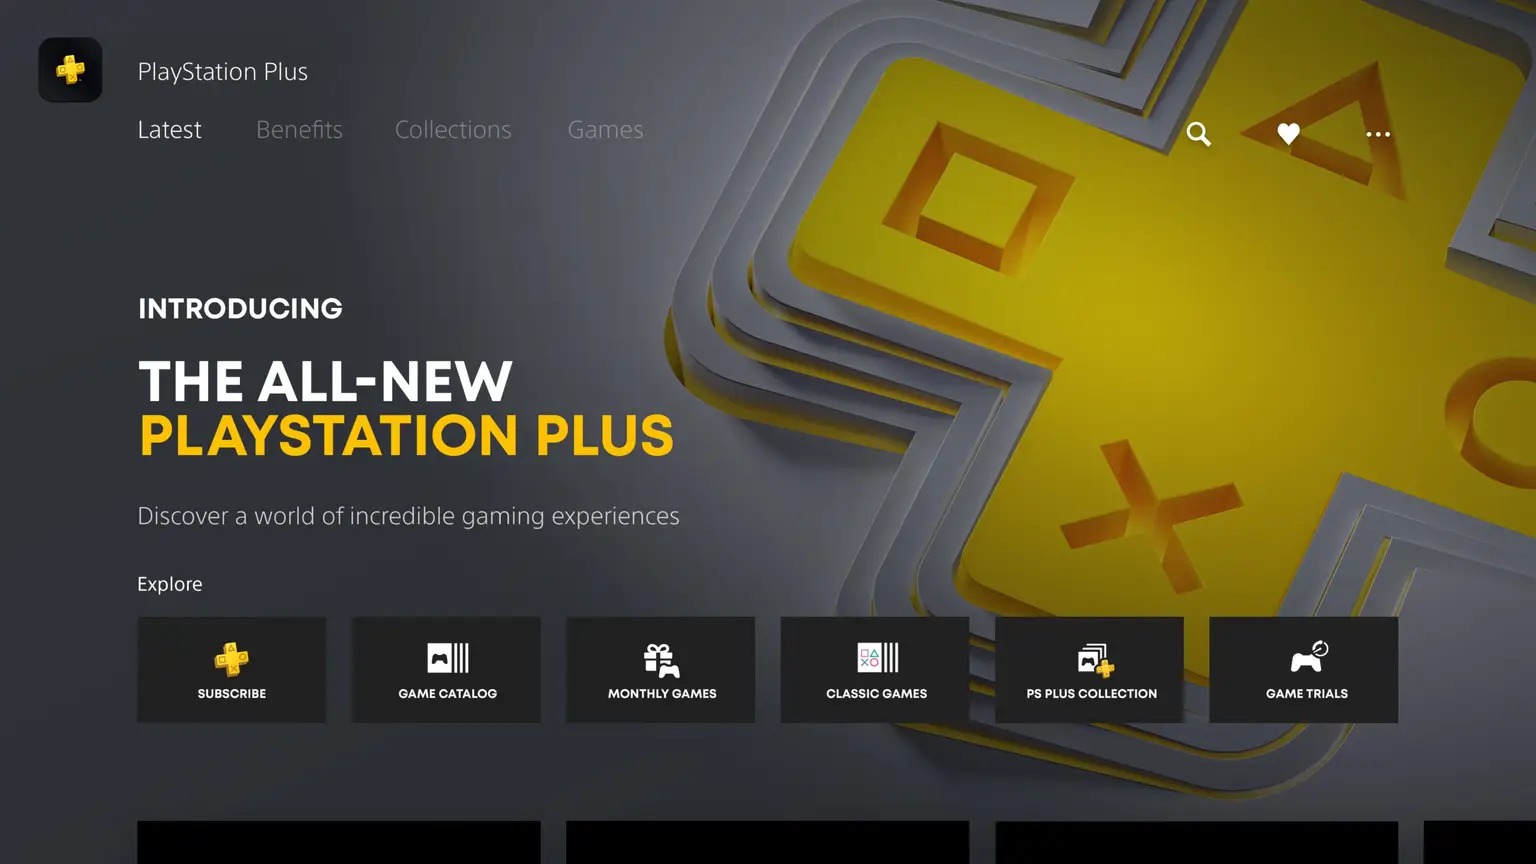 Playstation Plus: A date and a surprise guest - Ubisoft, Sony Interactive Entertainment - News

